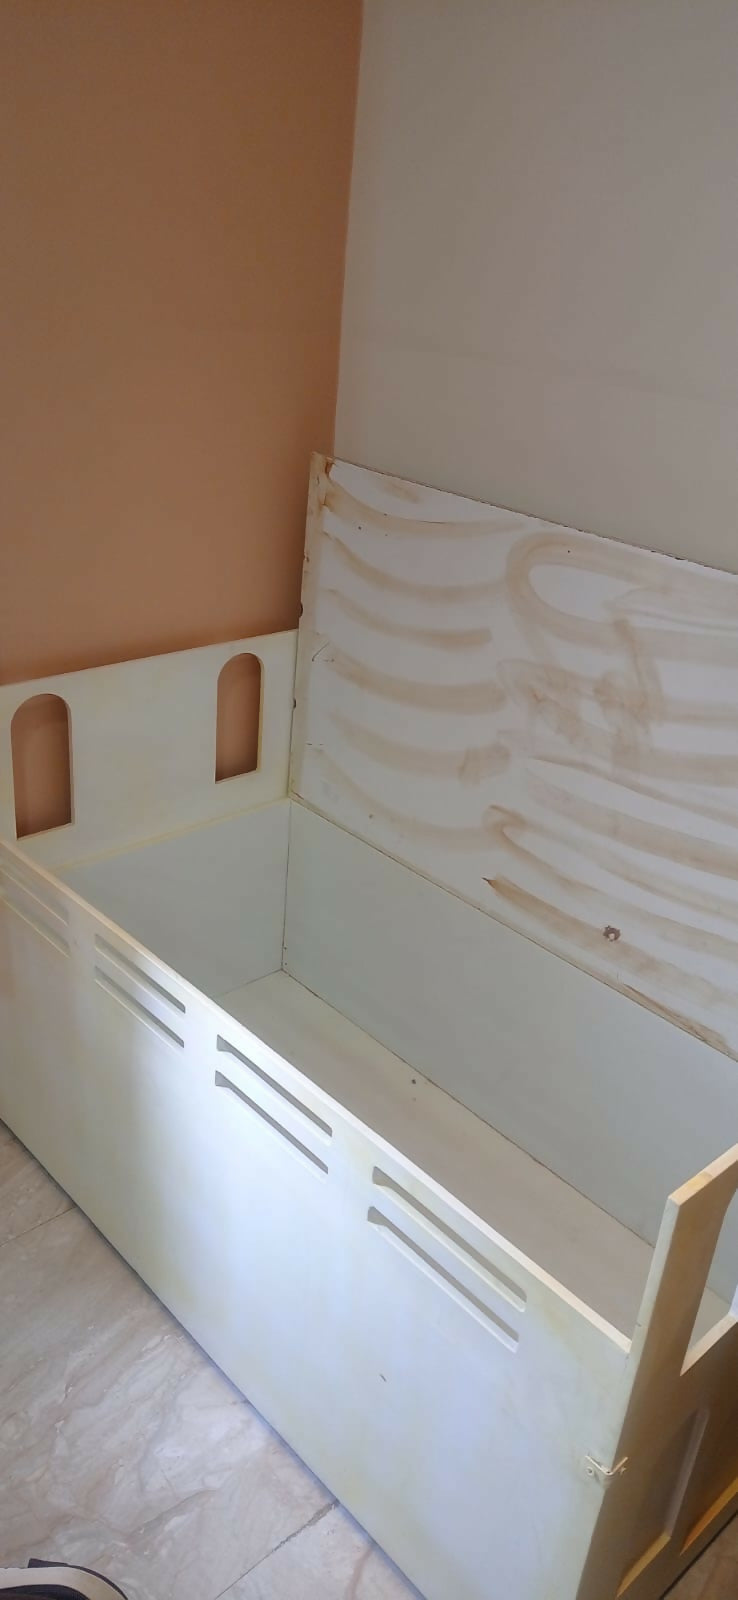 Customised Baby bed with storage, Dimensions: L49×W26×H28 inches - PyaraBaby